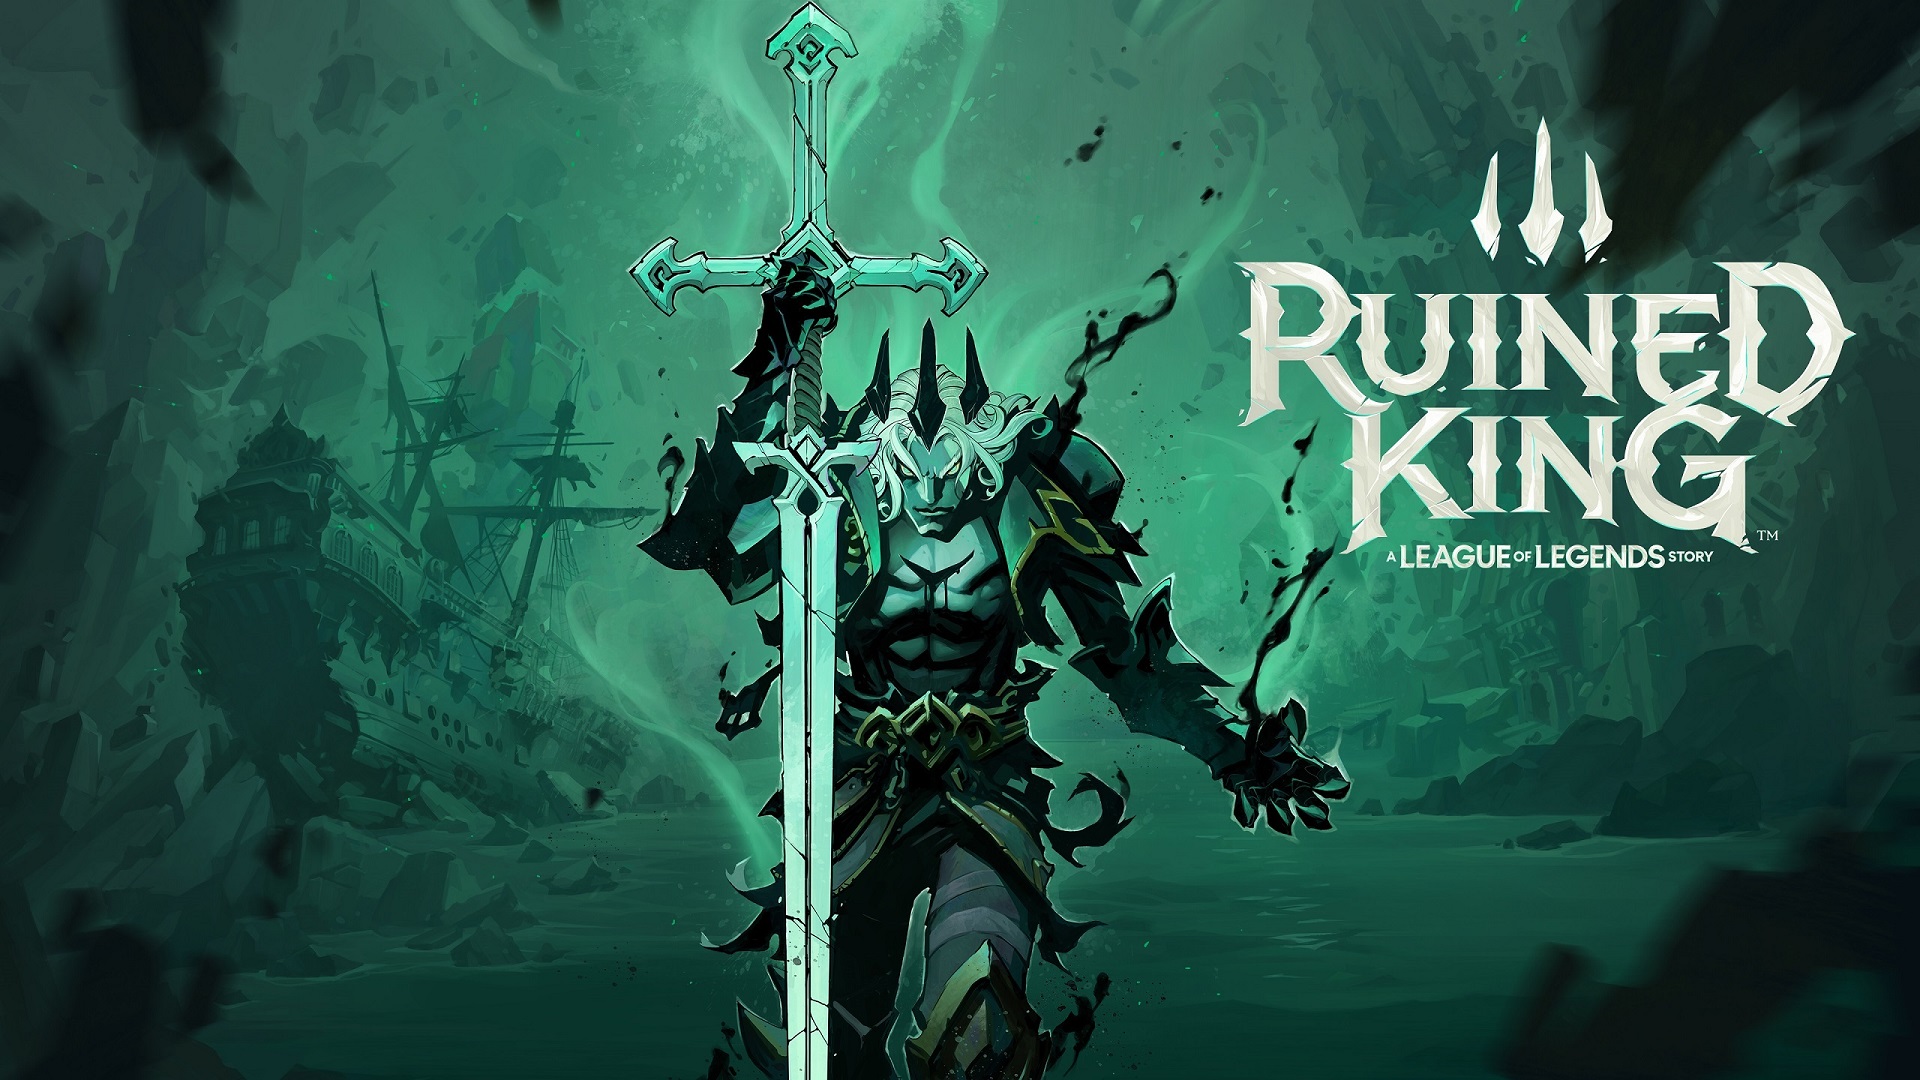 Ruined King: A League of Legends Story gets free next-gen ports